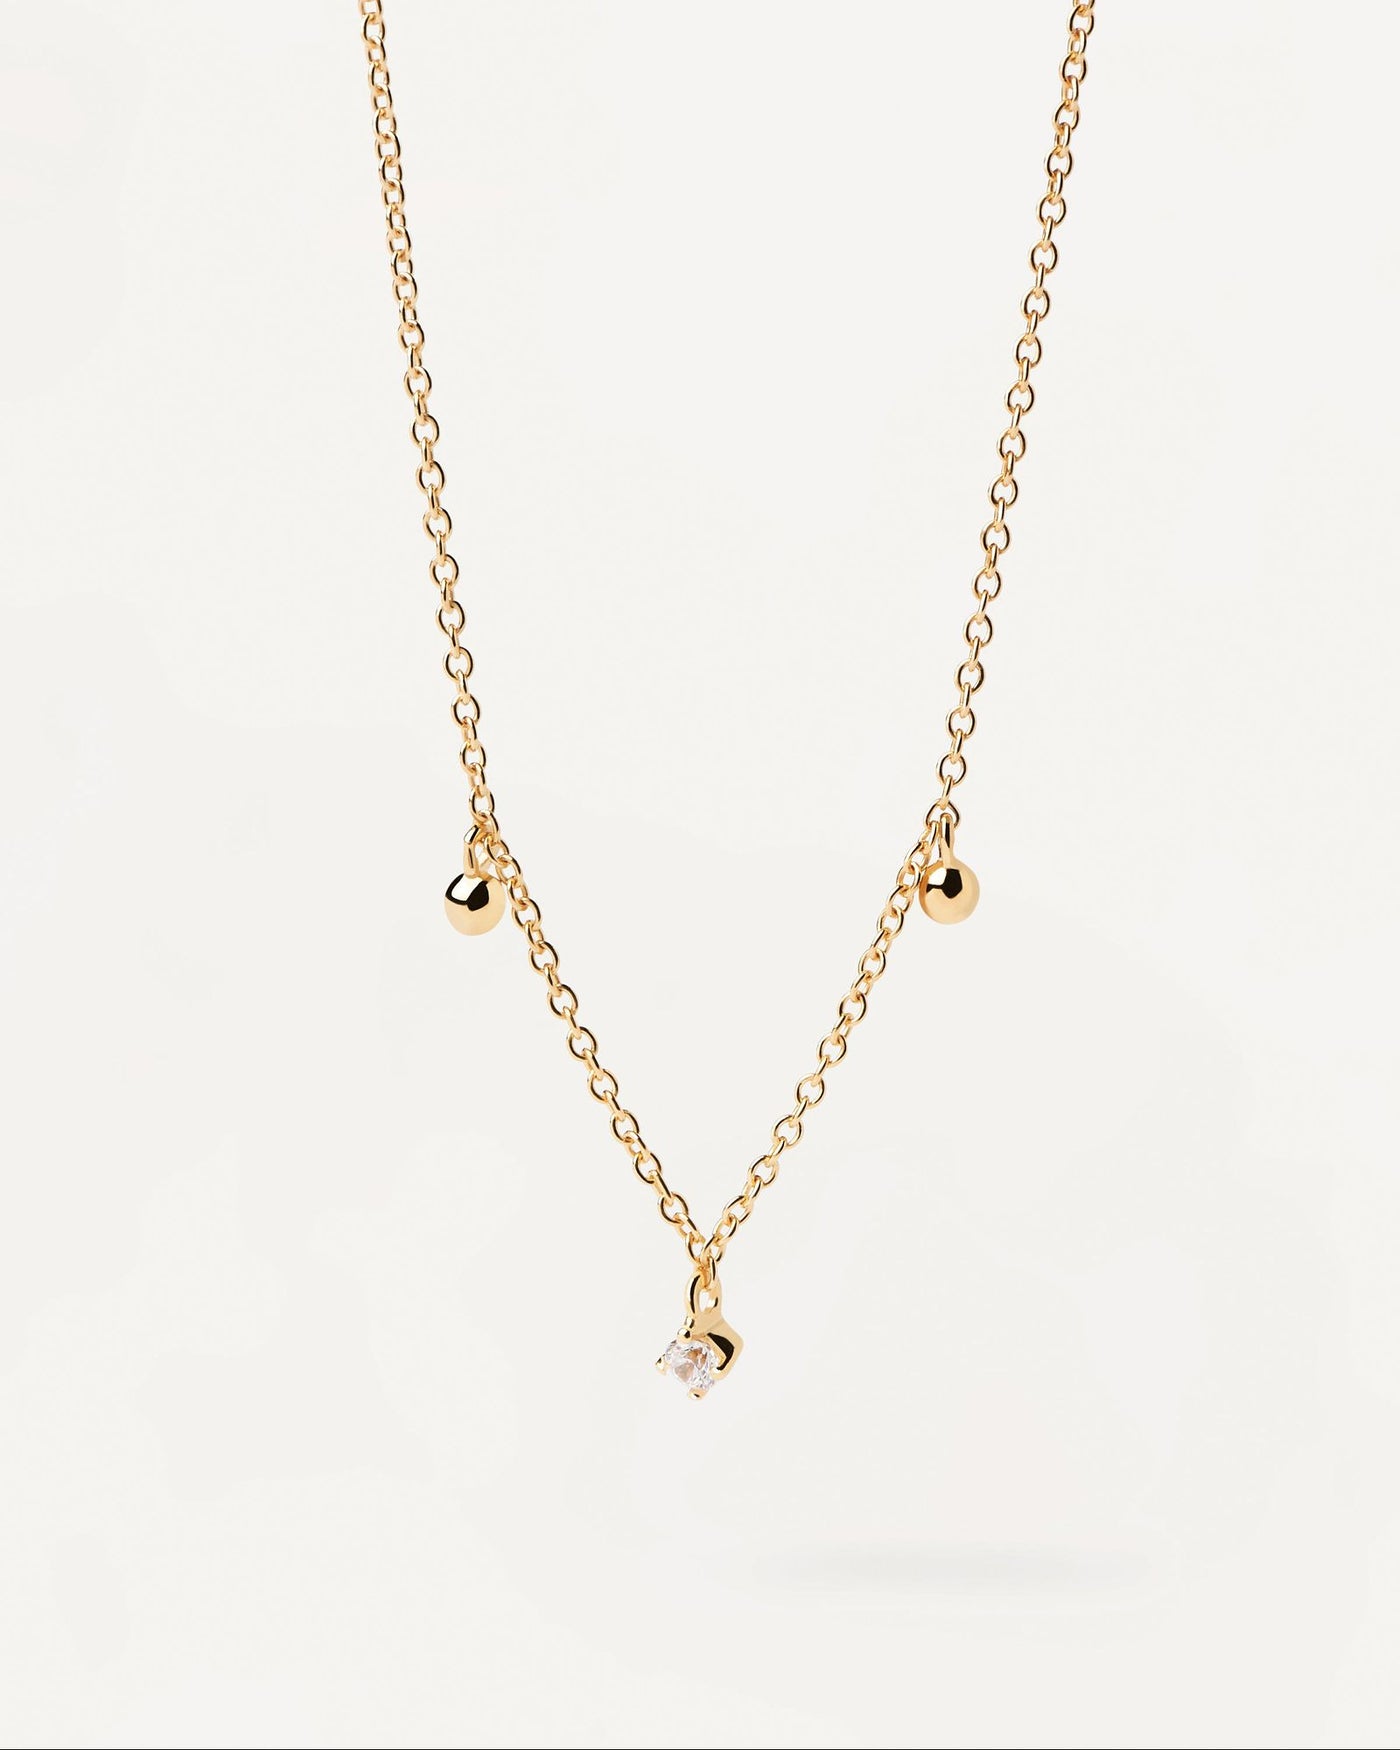 2024 Selection | Love Triangle Necklace. Gold-plated chain necklace with dainty balls and white zirconia. Get the latest arrival from PDPAOLA. Place your order safely and get this Best Seller. Free Shipping.